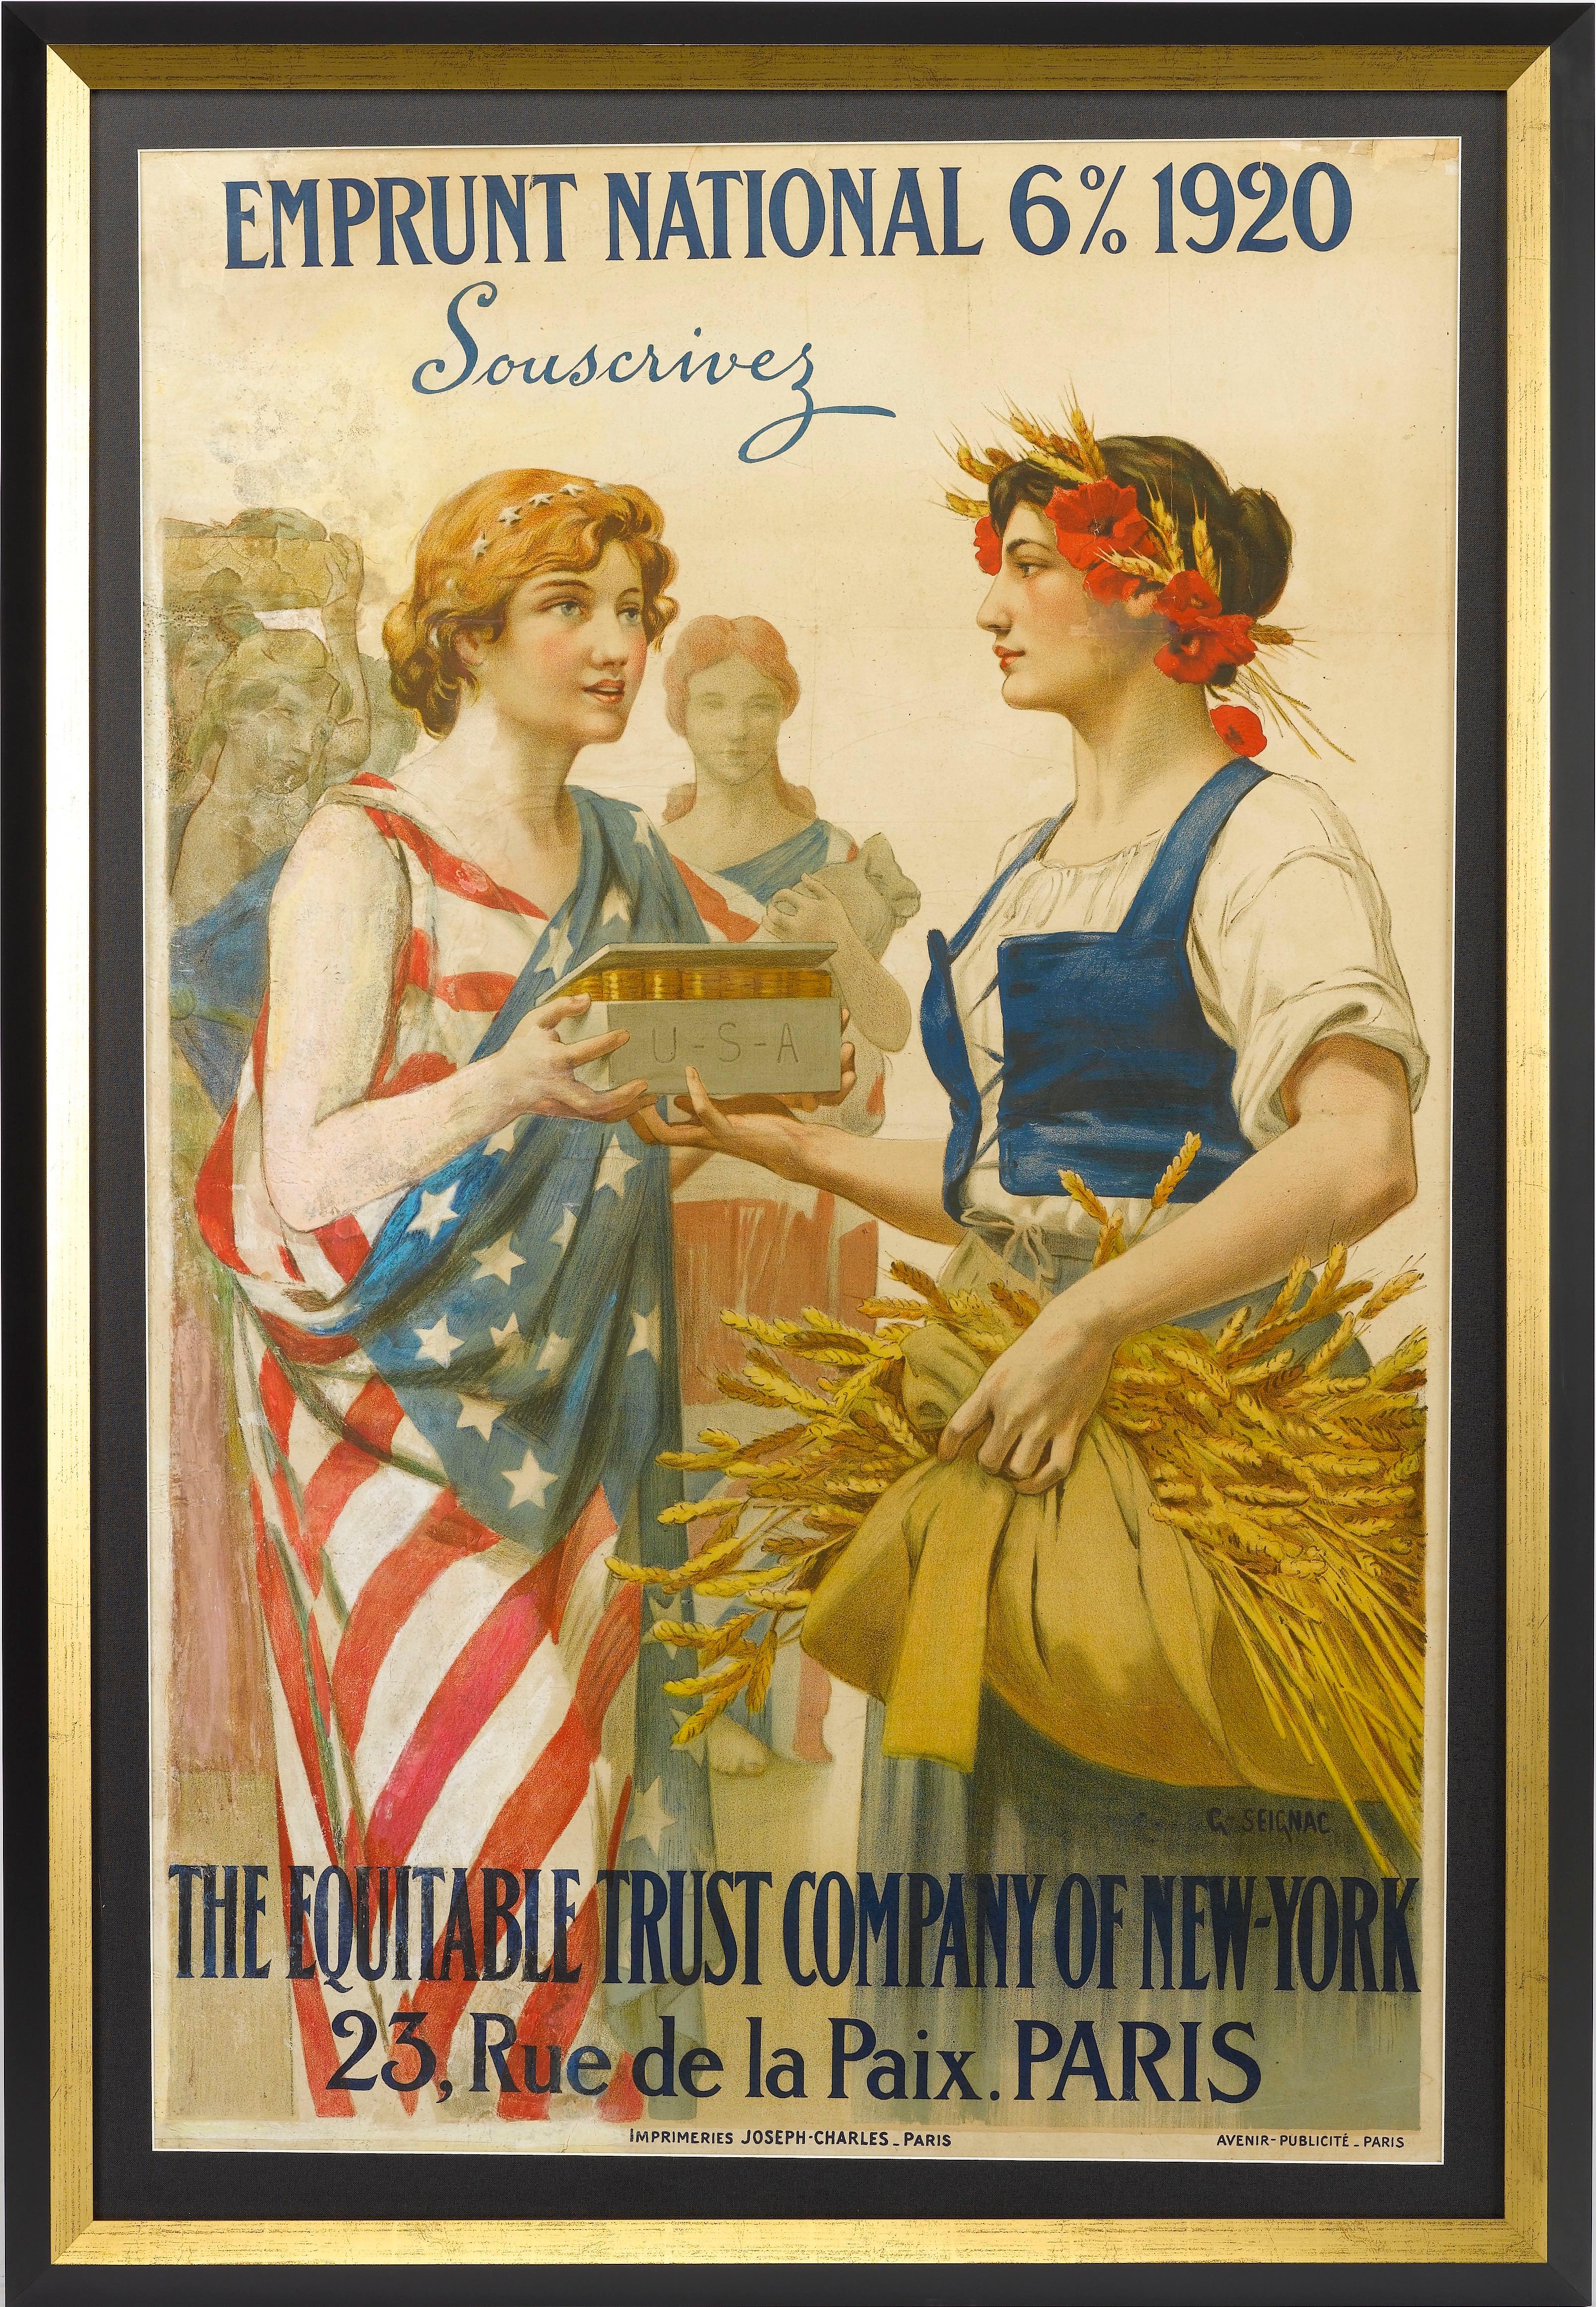 Paris 6% Emprunt National 1920 Poster - Equitable Trust Company of New York

This is an original post-Great War poster that was used to raise money for the rebuilding of France after the war and features Lady Liberty dropped in an American flag